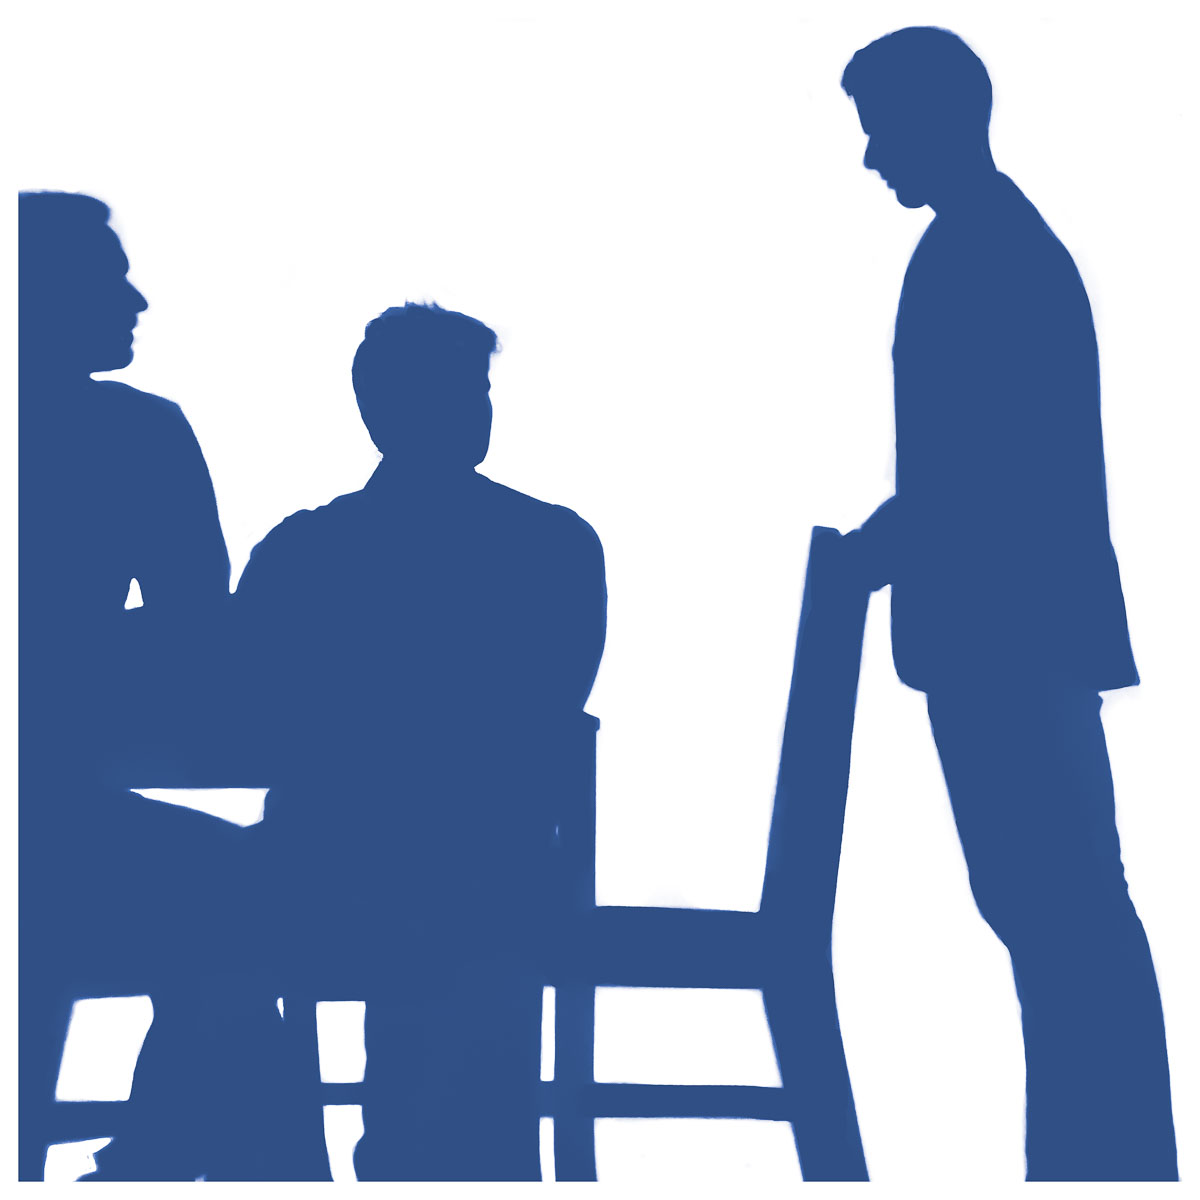 Blue silhouette of a man reaching for chair and 2 men sitting down looking at him